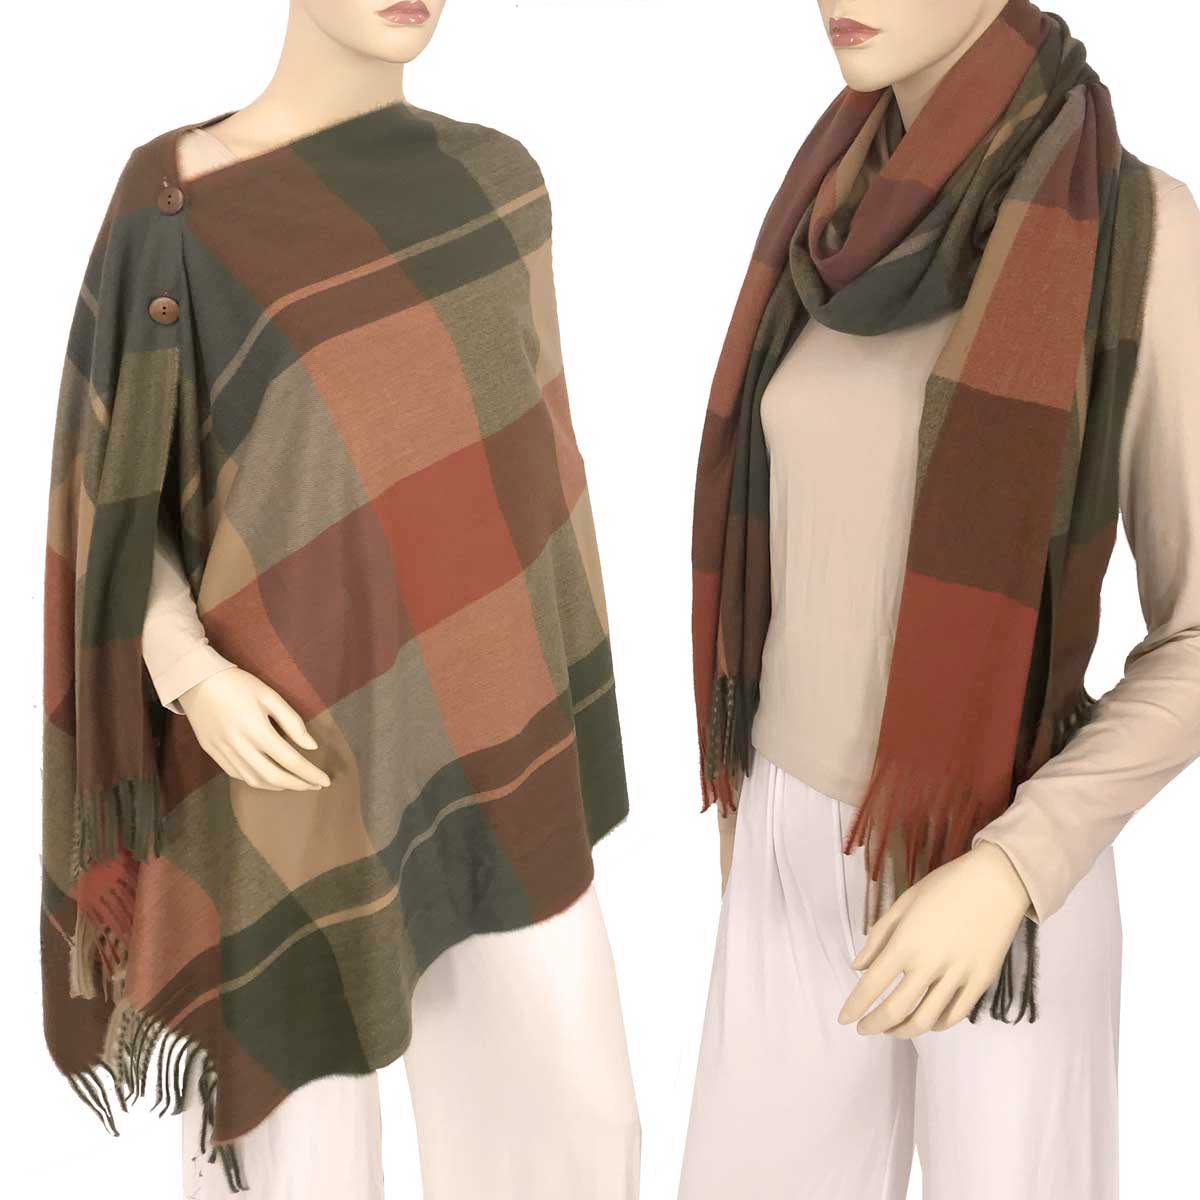 3306 - Plaid Button Shawls 3306 BUFFALO PLAID RED/BLACK with Black Buttons - 